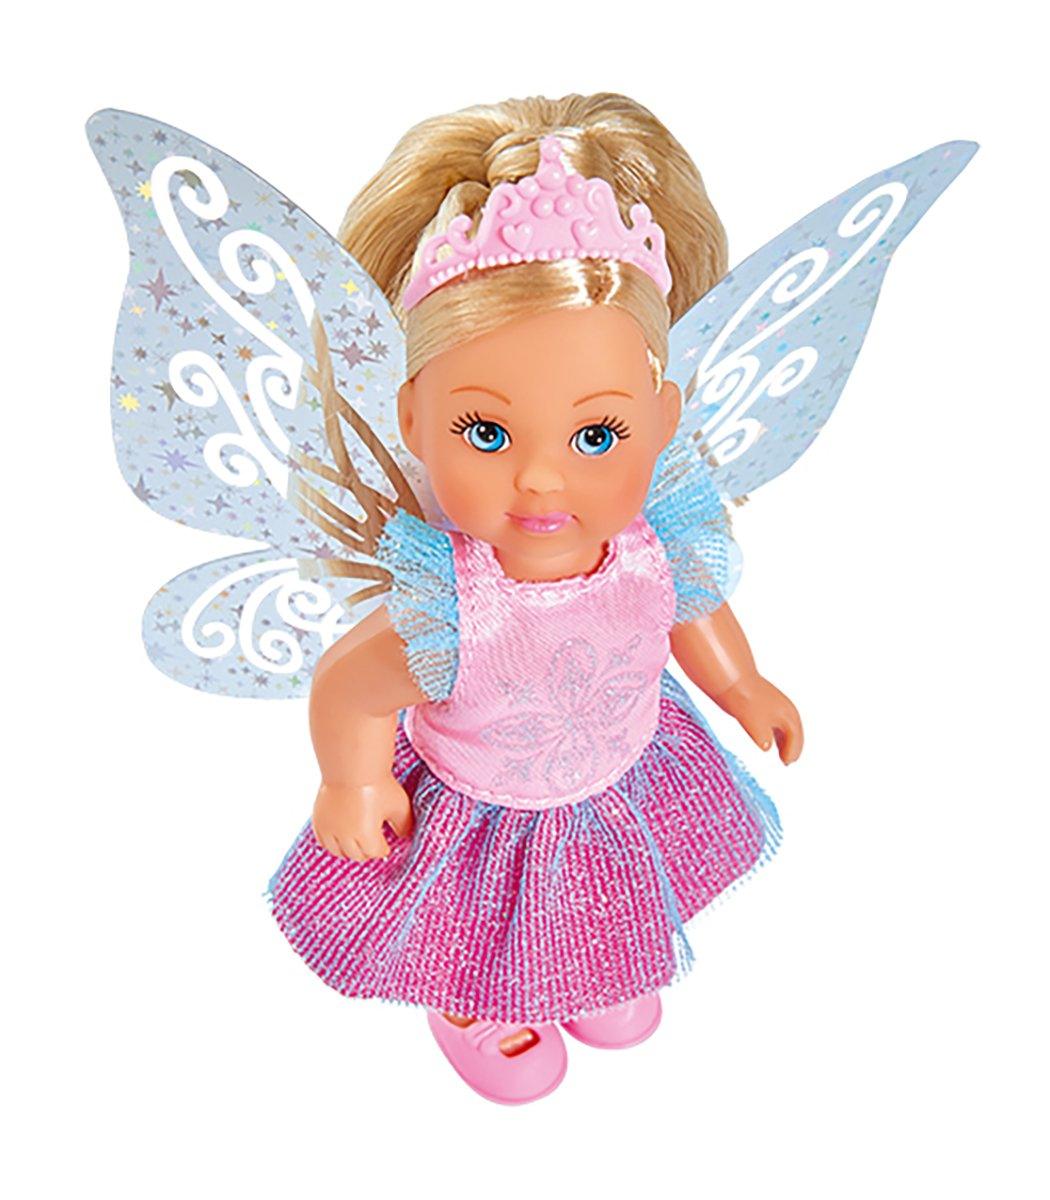 Simba Evi Love Sparkle Fairy- Design & Styles May Vary- Only 1 included